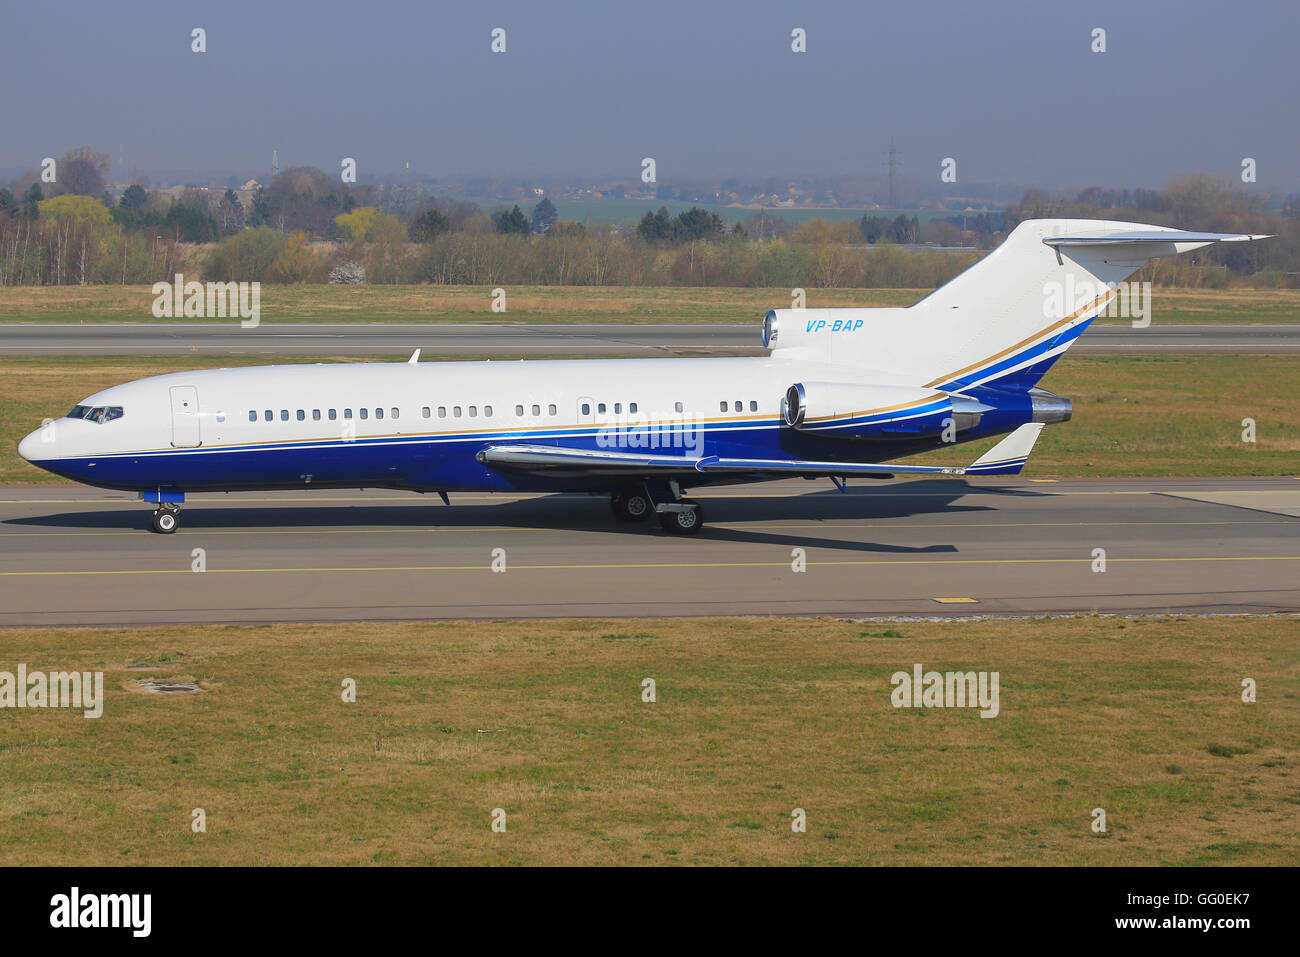 Liege/Netherland August 29, 2015: Boeing 727 from Malibu Consulting Corporation at Liege Airport. Stock Photo